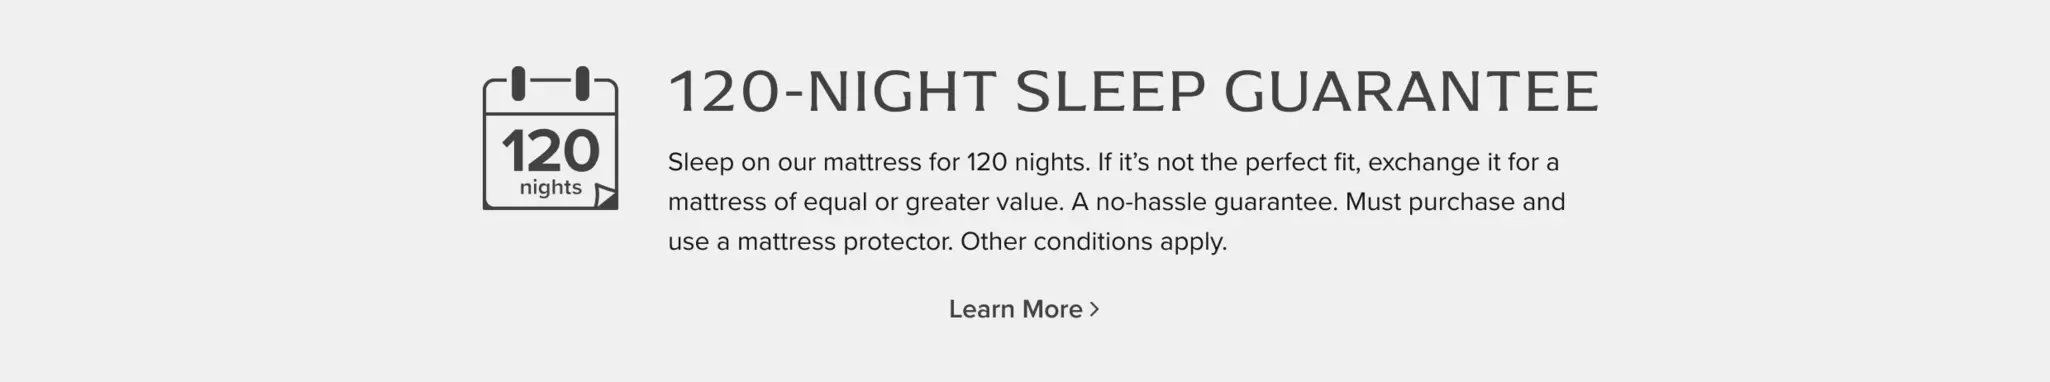 120-Night Sleep Guarantee: Sleep on our mattress for 120 nights. If it's not the perfect fit, exchange it for a mattress of equal or greater value. A no-hassle guarantee. Must purchase and use a mattress protector. Other conditions apply. Learn More.